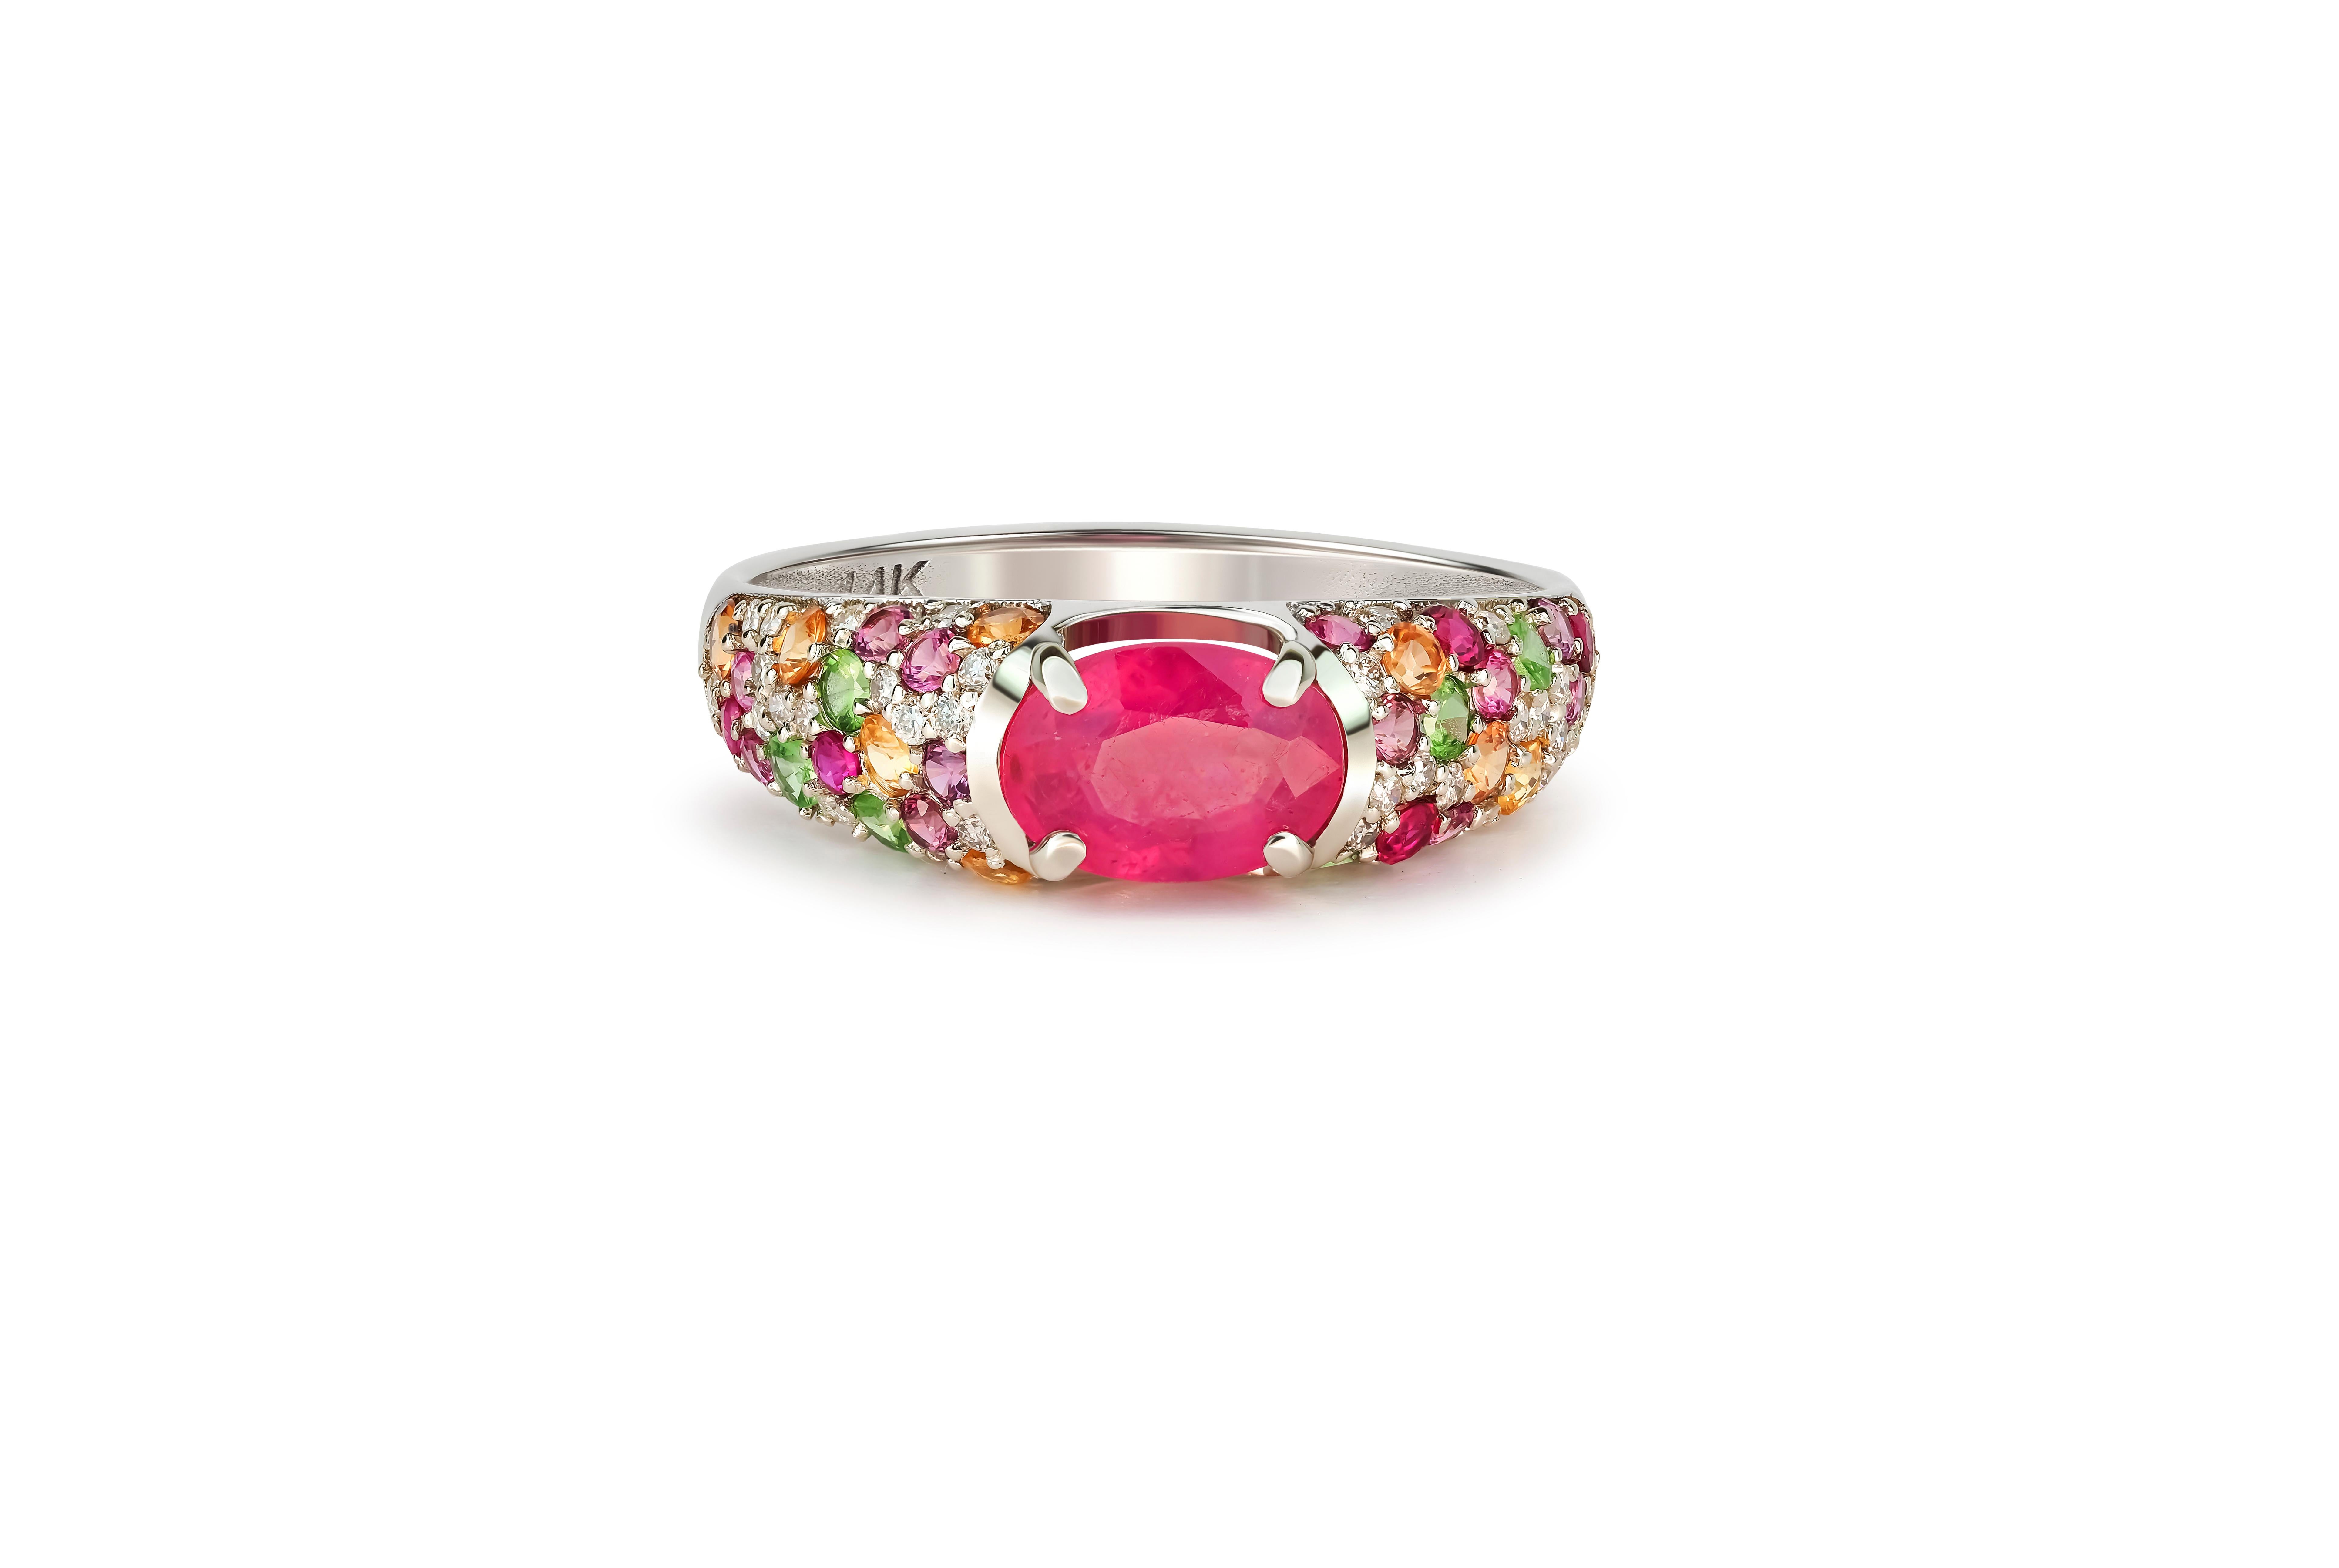 For Sale:  14k gold ruby and multicolored gemstones ring. 2